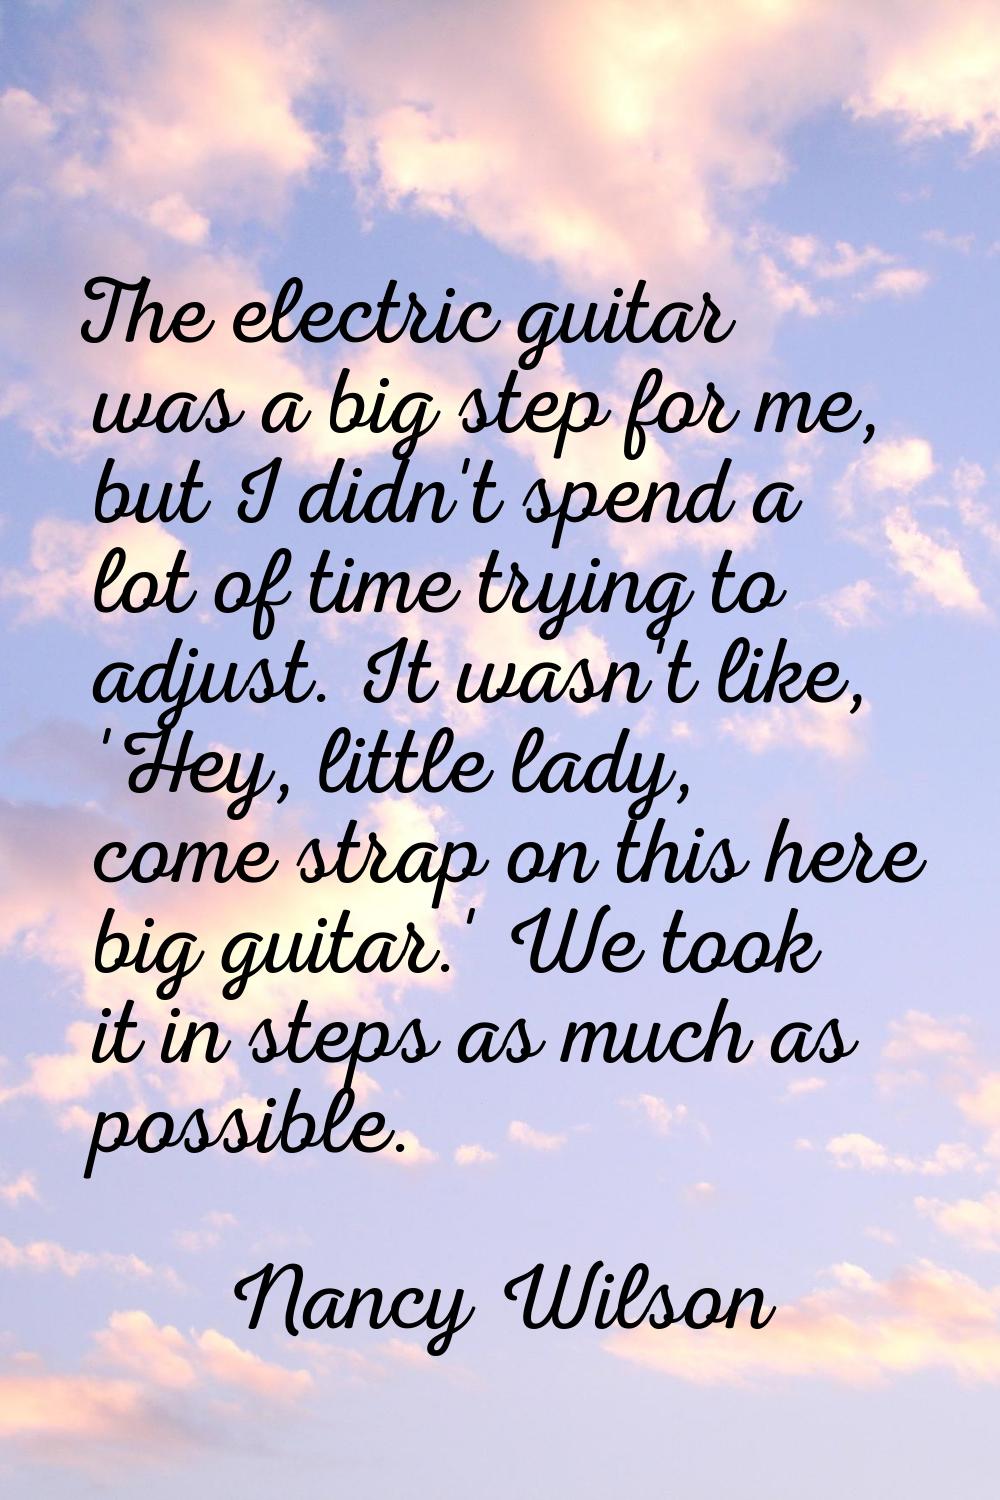 The electric guitar was a big step for me, but I didn't spend a lot of time trying to adjust. It wa